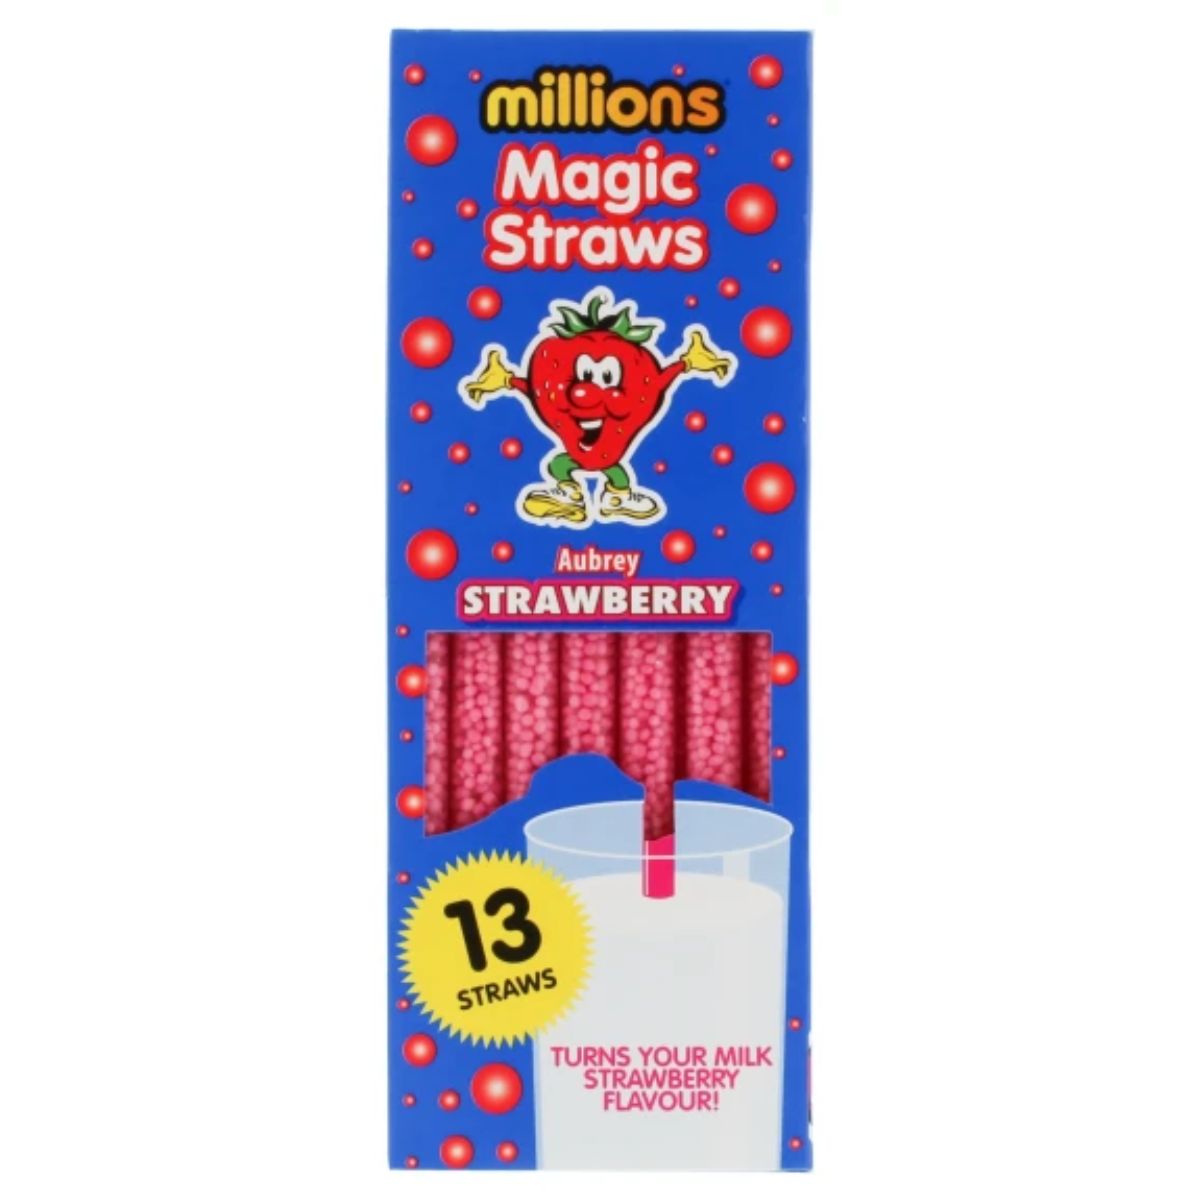 Packaging for "Millions - Magic Straws Strawberry - 78g" with 13 straws that turn milk into strawberry milk.